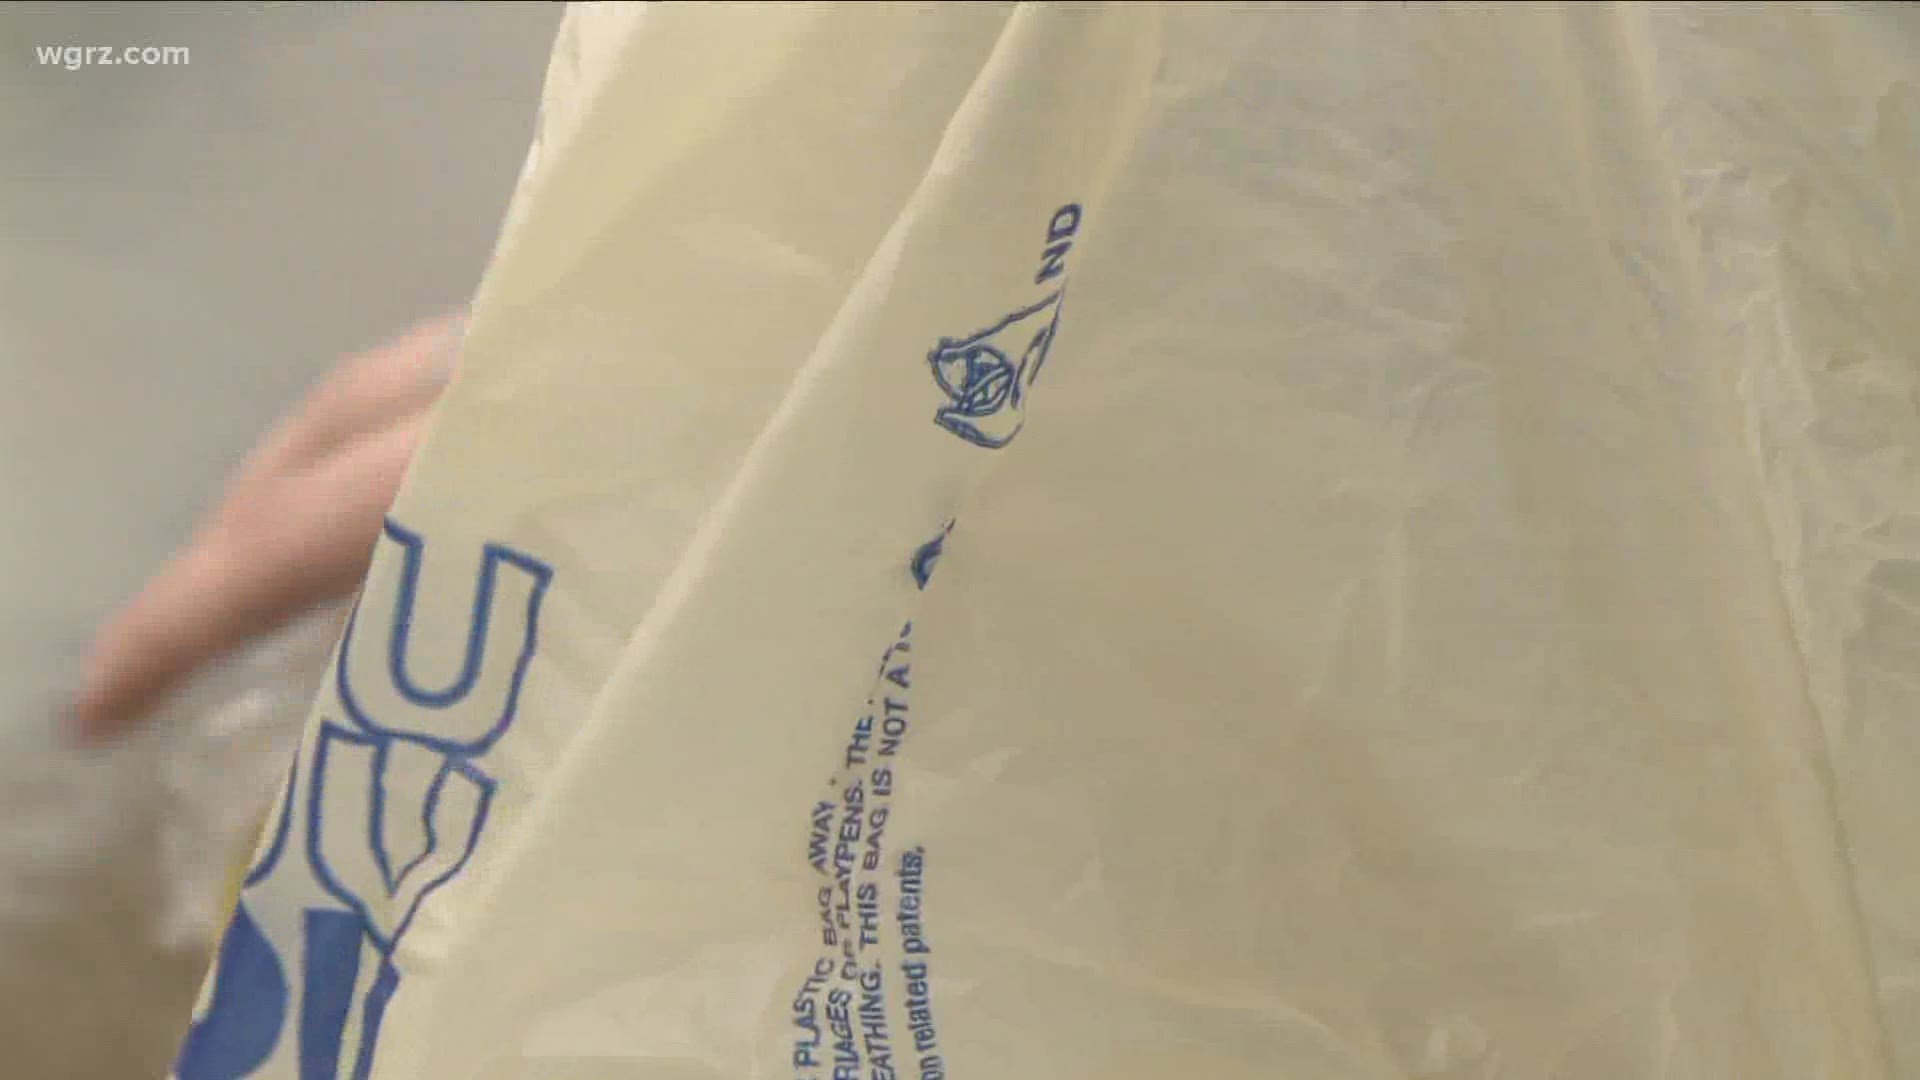 The New York State DEC commissioner said enforcement of the state’s ban on single-use plastic carryout bags will begin on October 19.